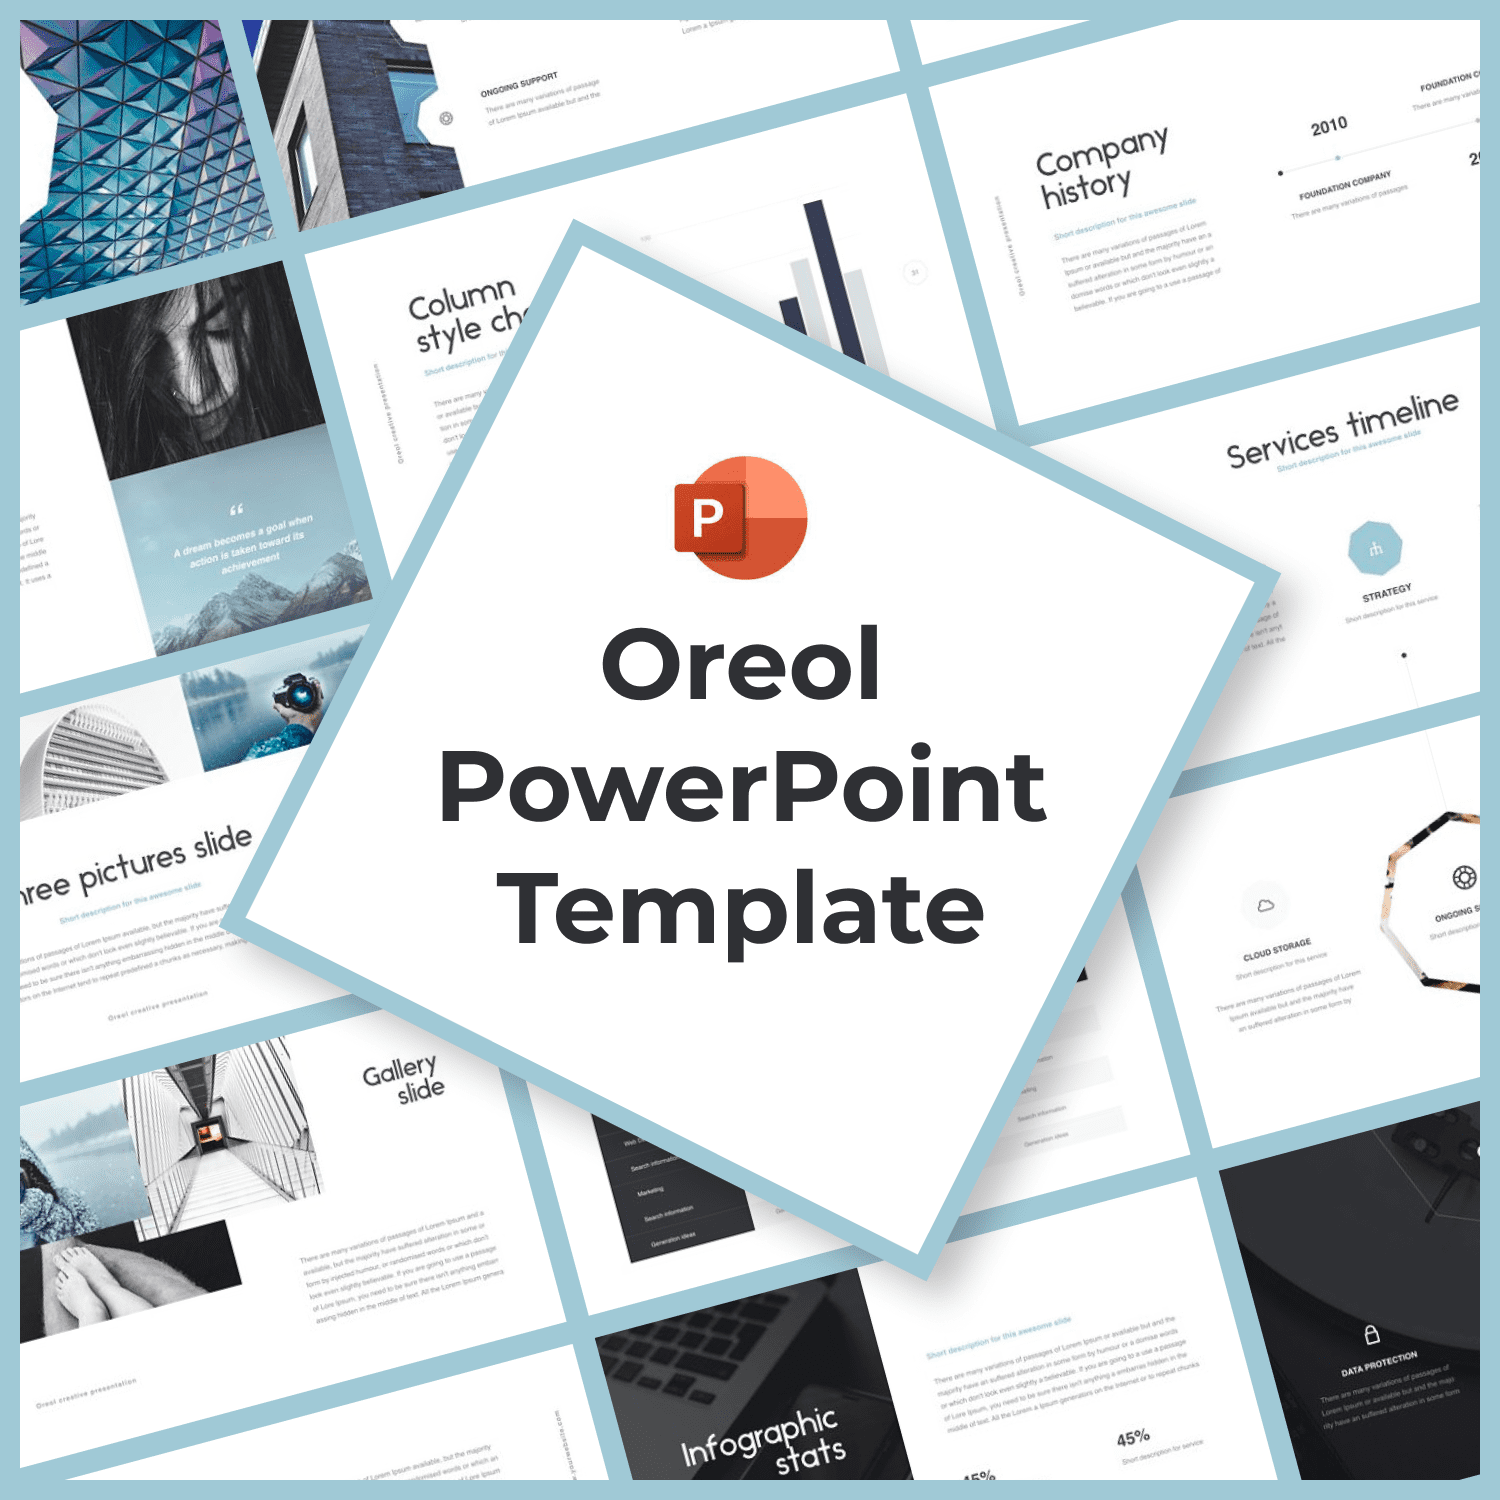 Oreol PowerPoint Template main cover.